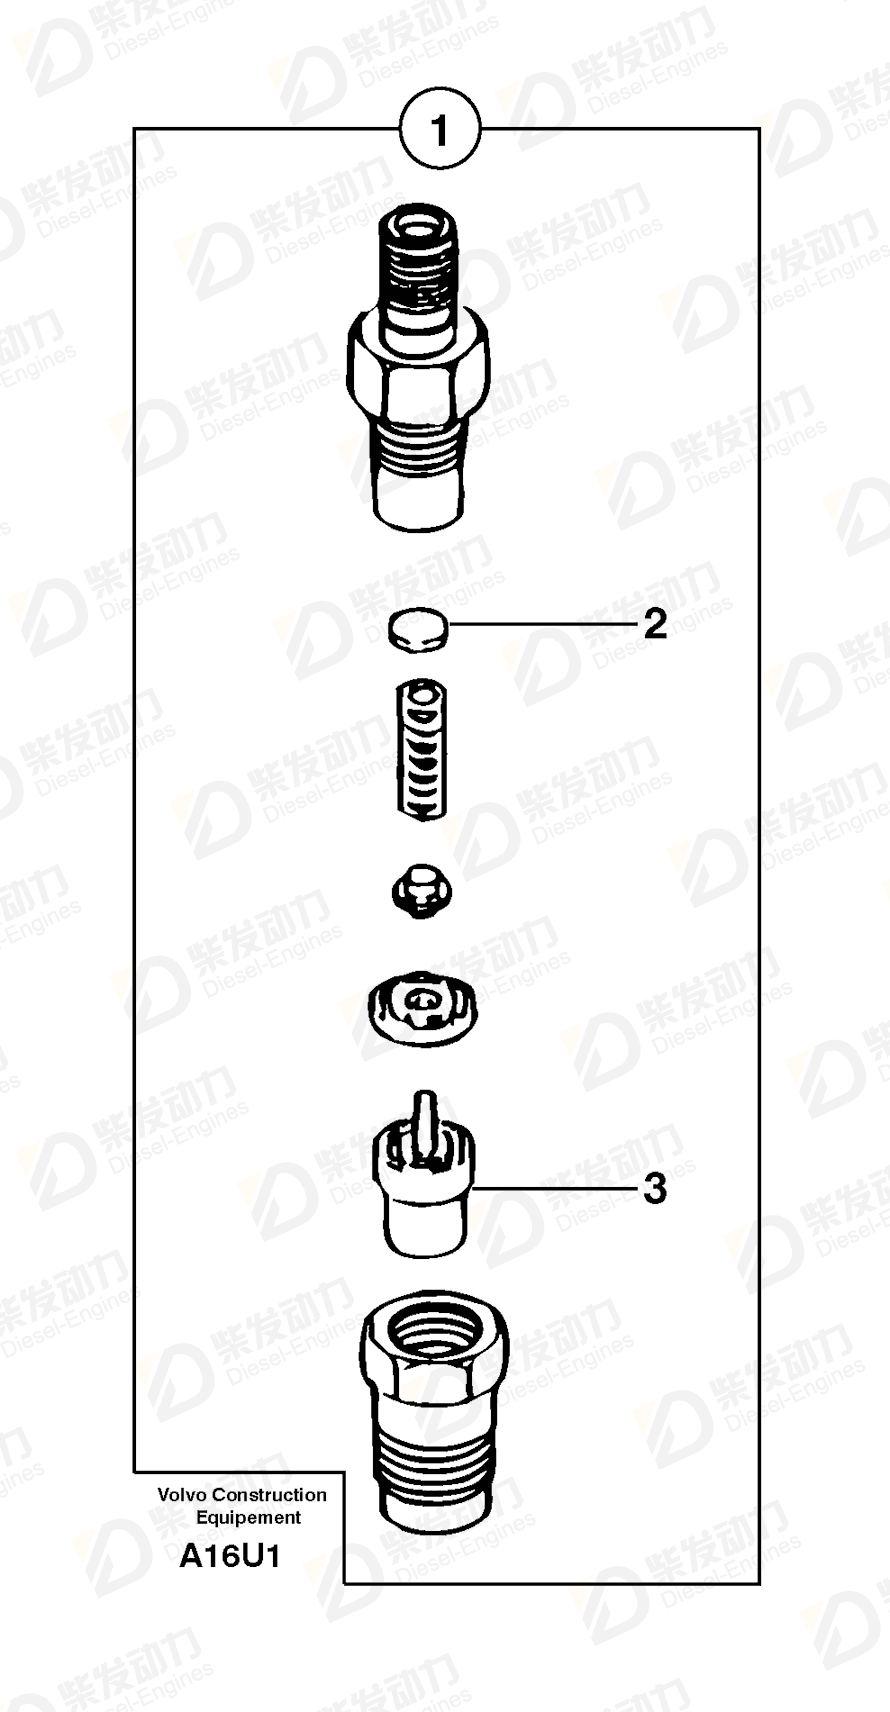 VOLVO Injector 7416573 Drawing